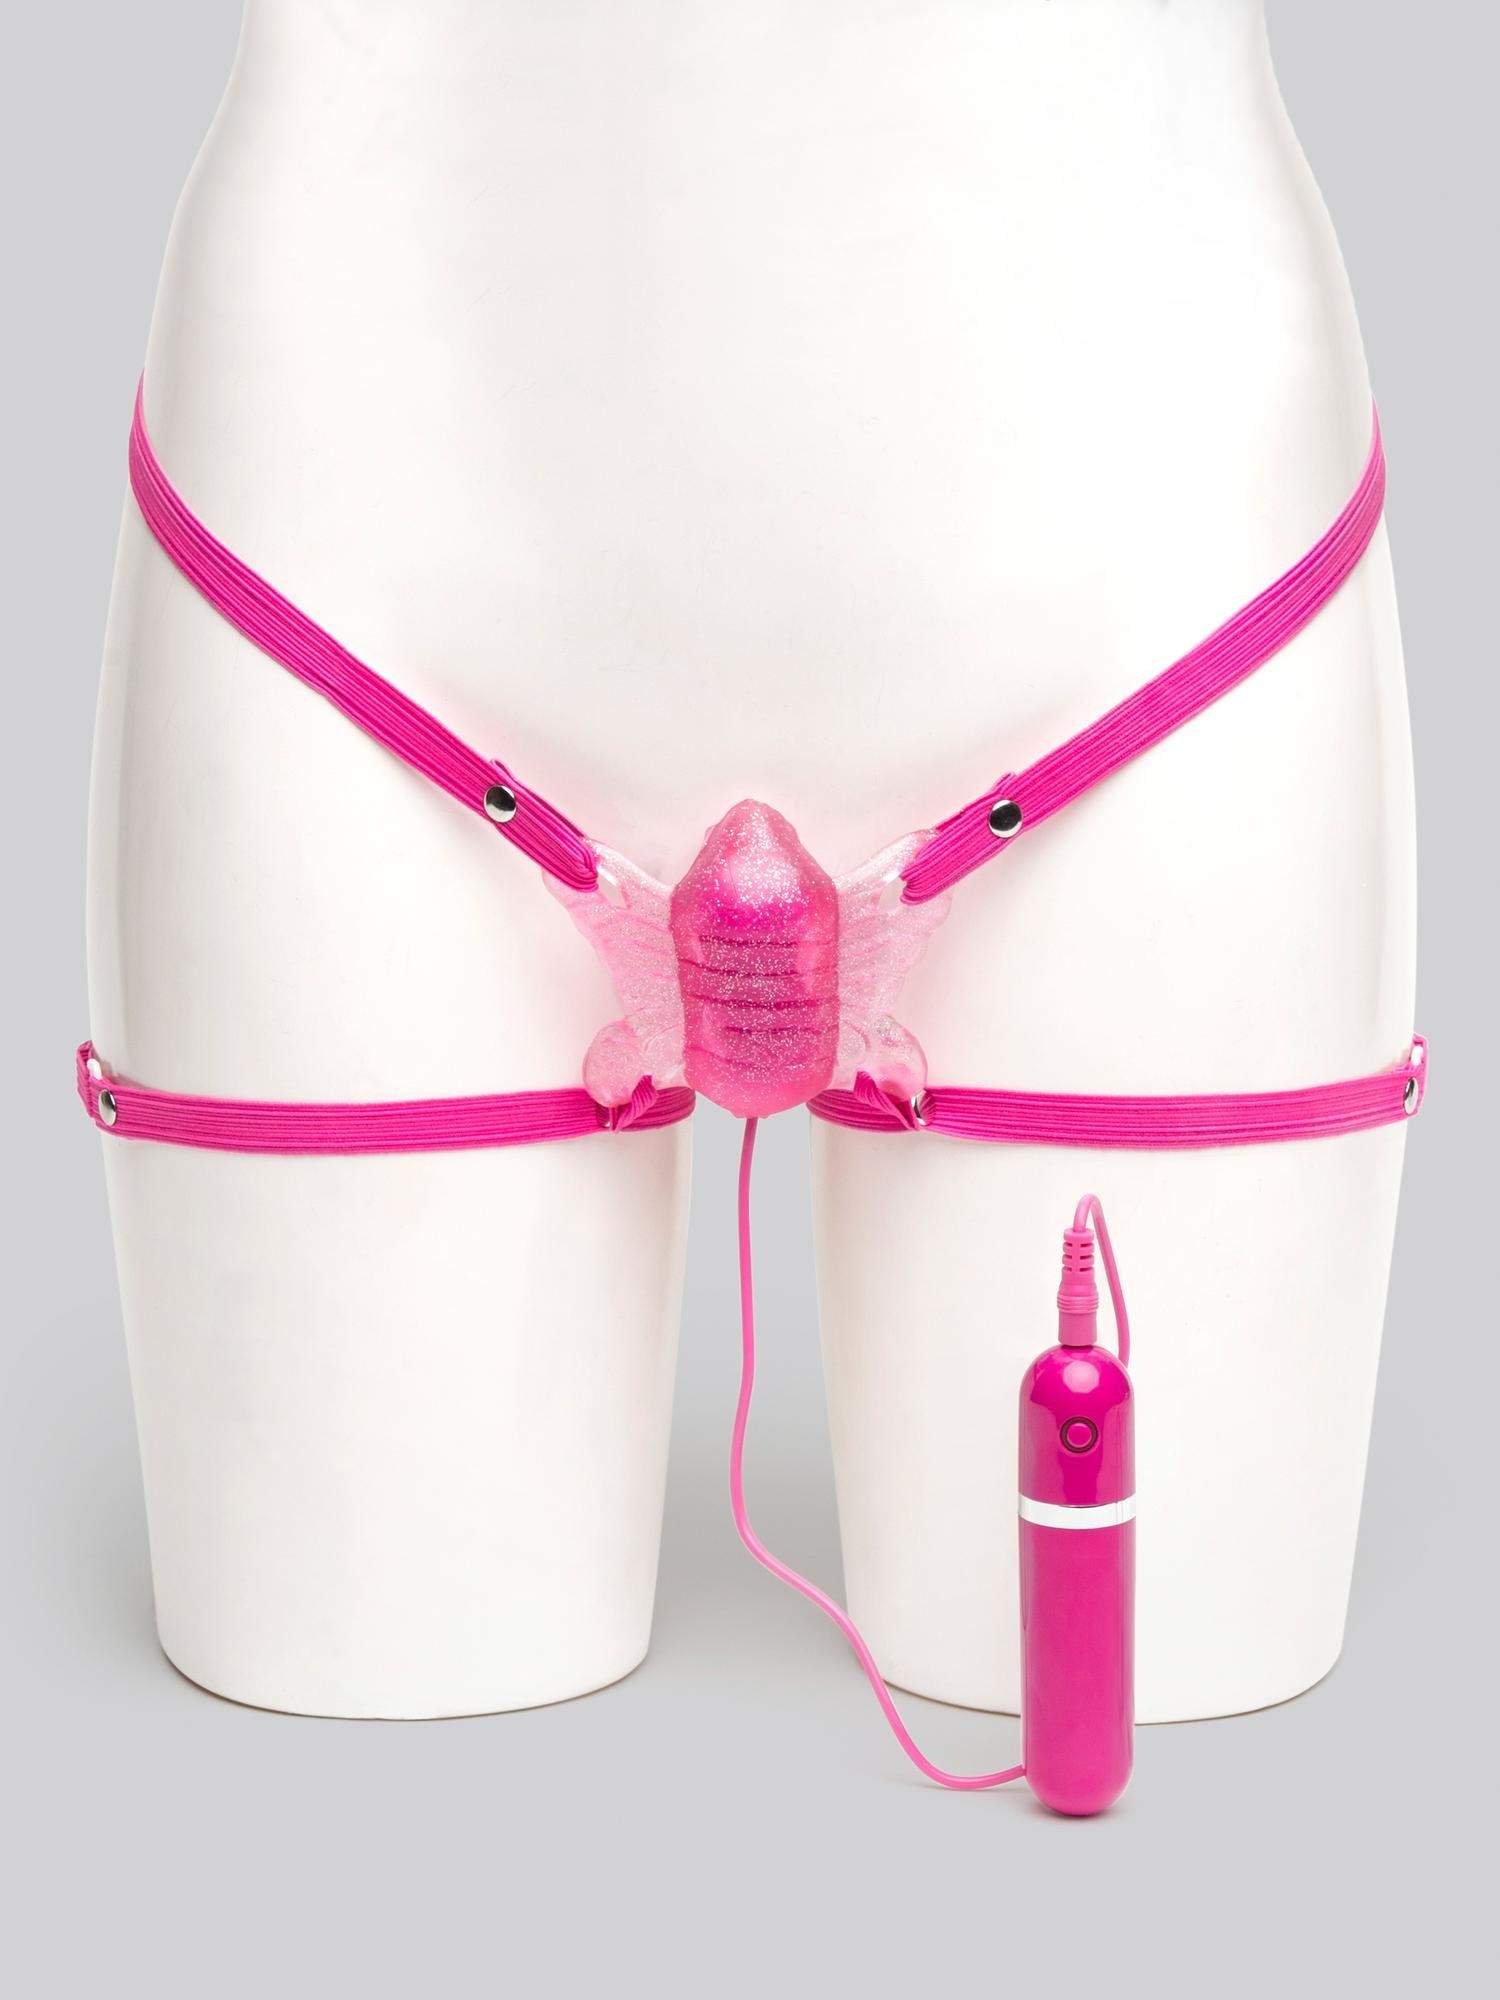 the pink butterfly vibrator on a mannequin